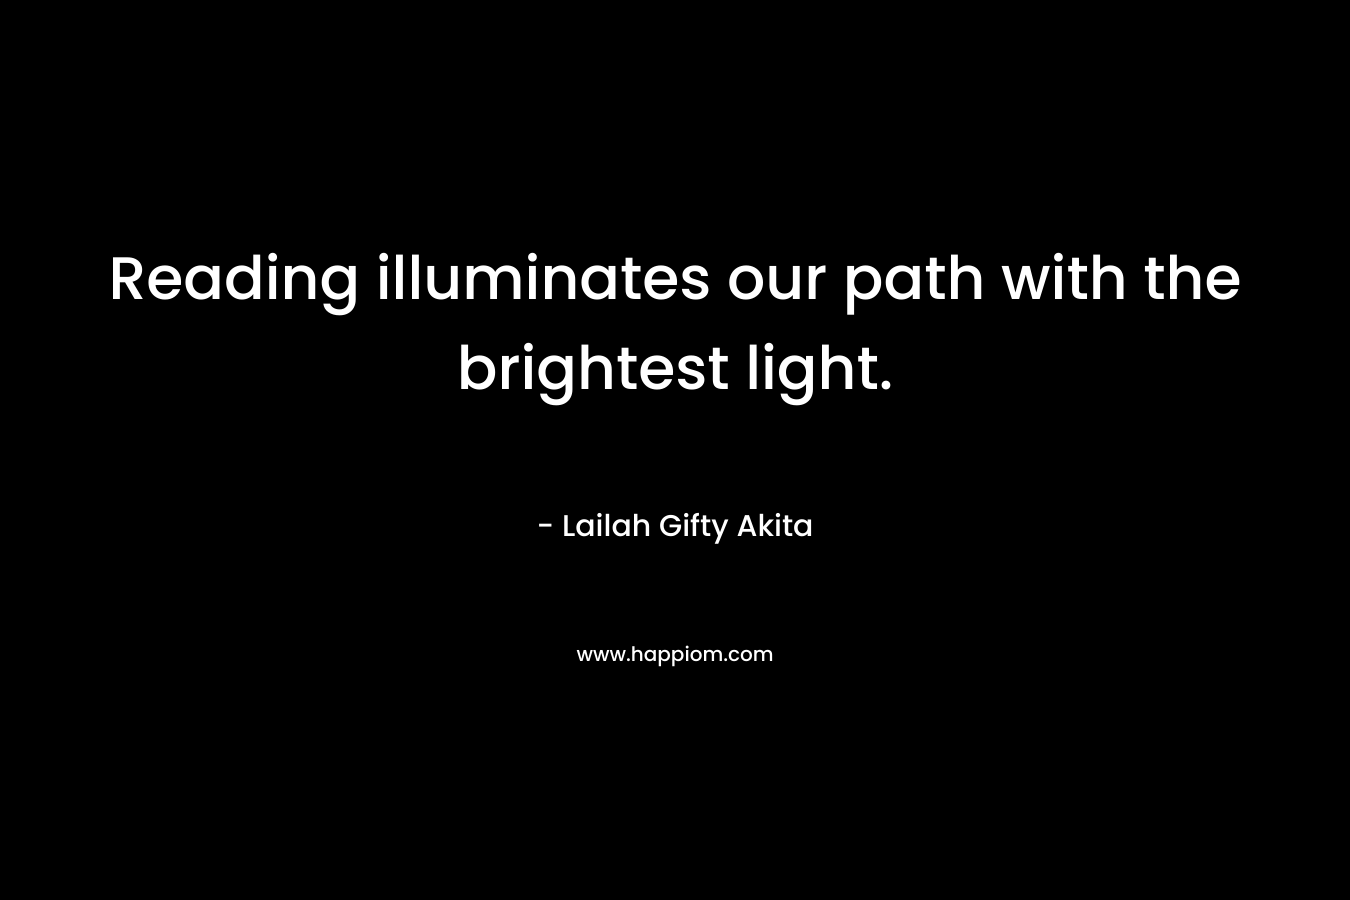 Reading illuminates our path with the brightest light. – Lailah Gifty Akita